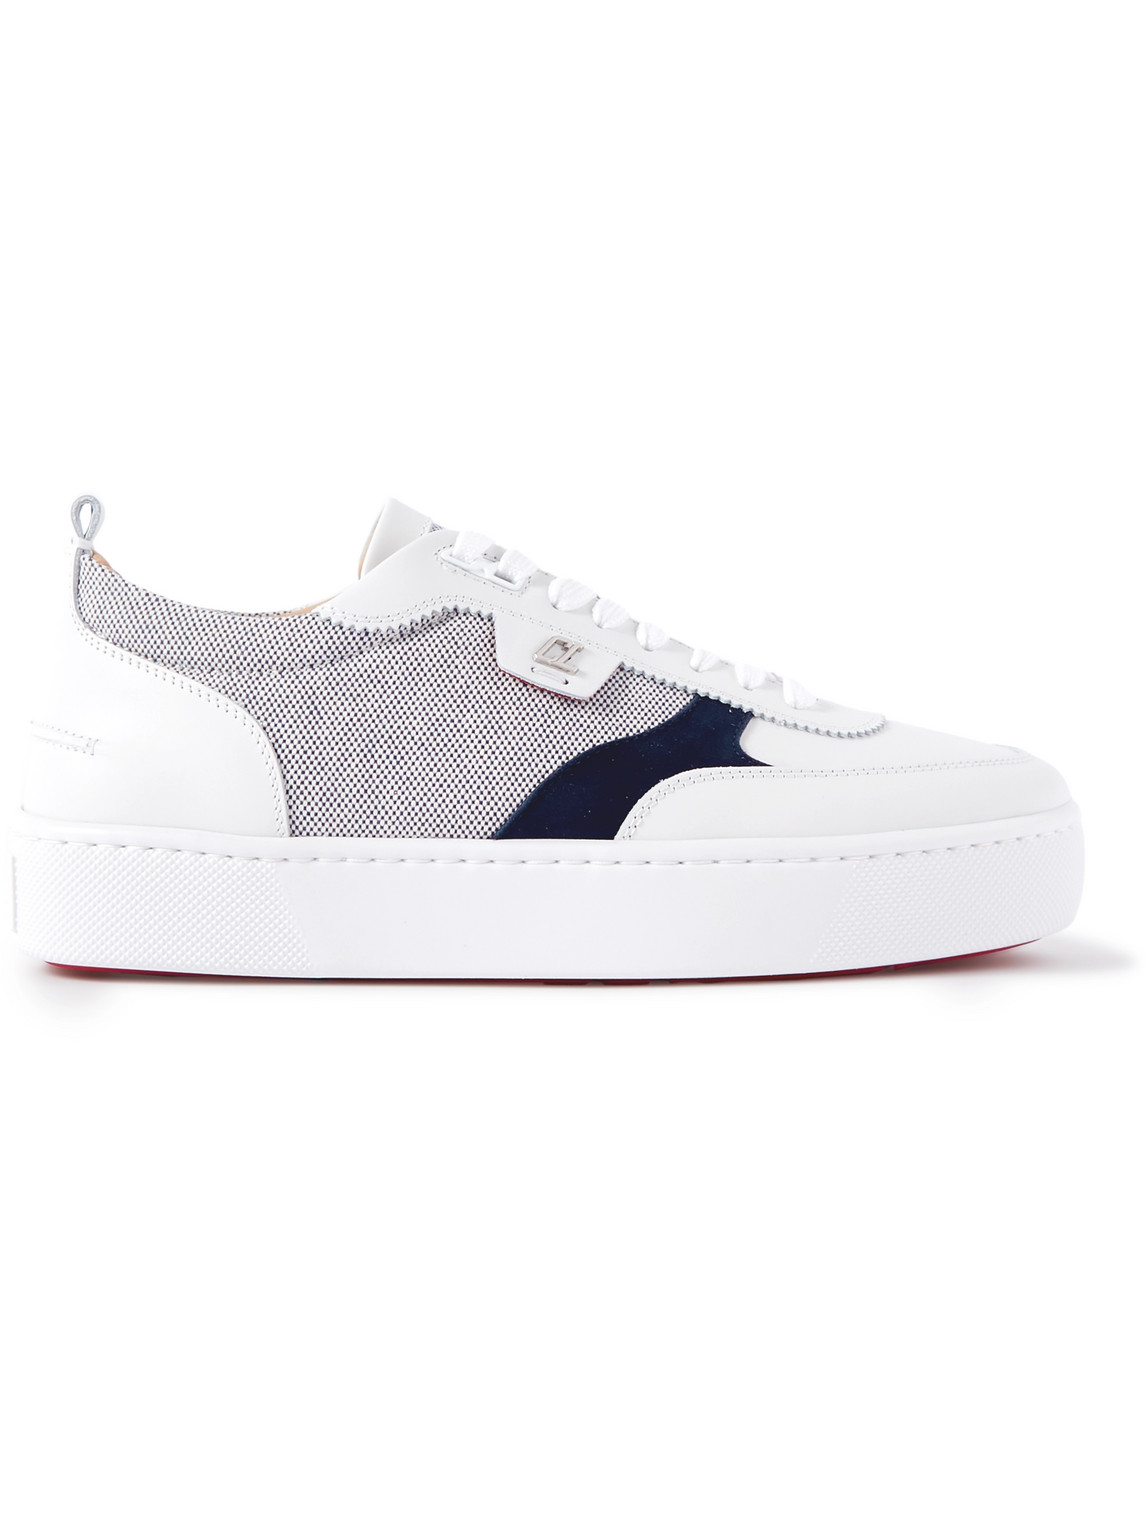 Christian Louboutin Happyrui Canvas And Leather Trainers In White/blue